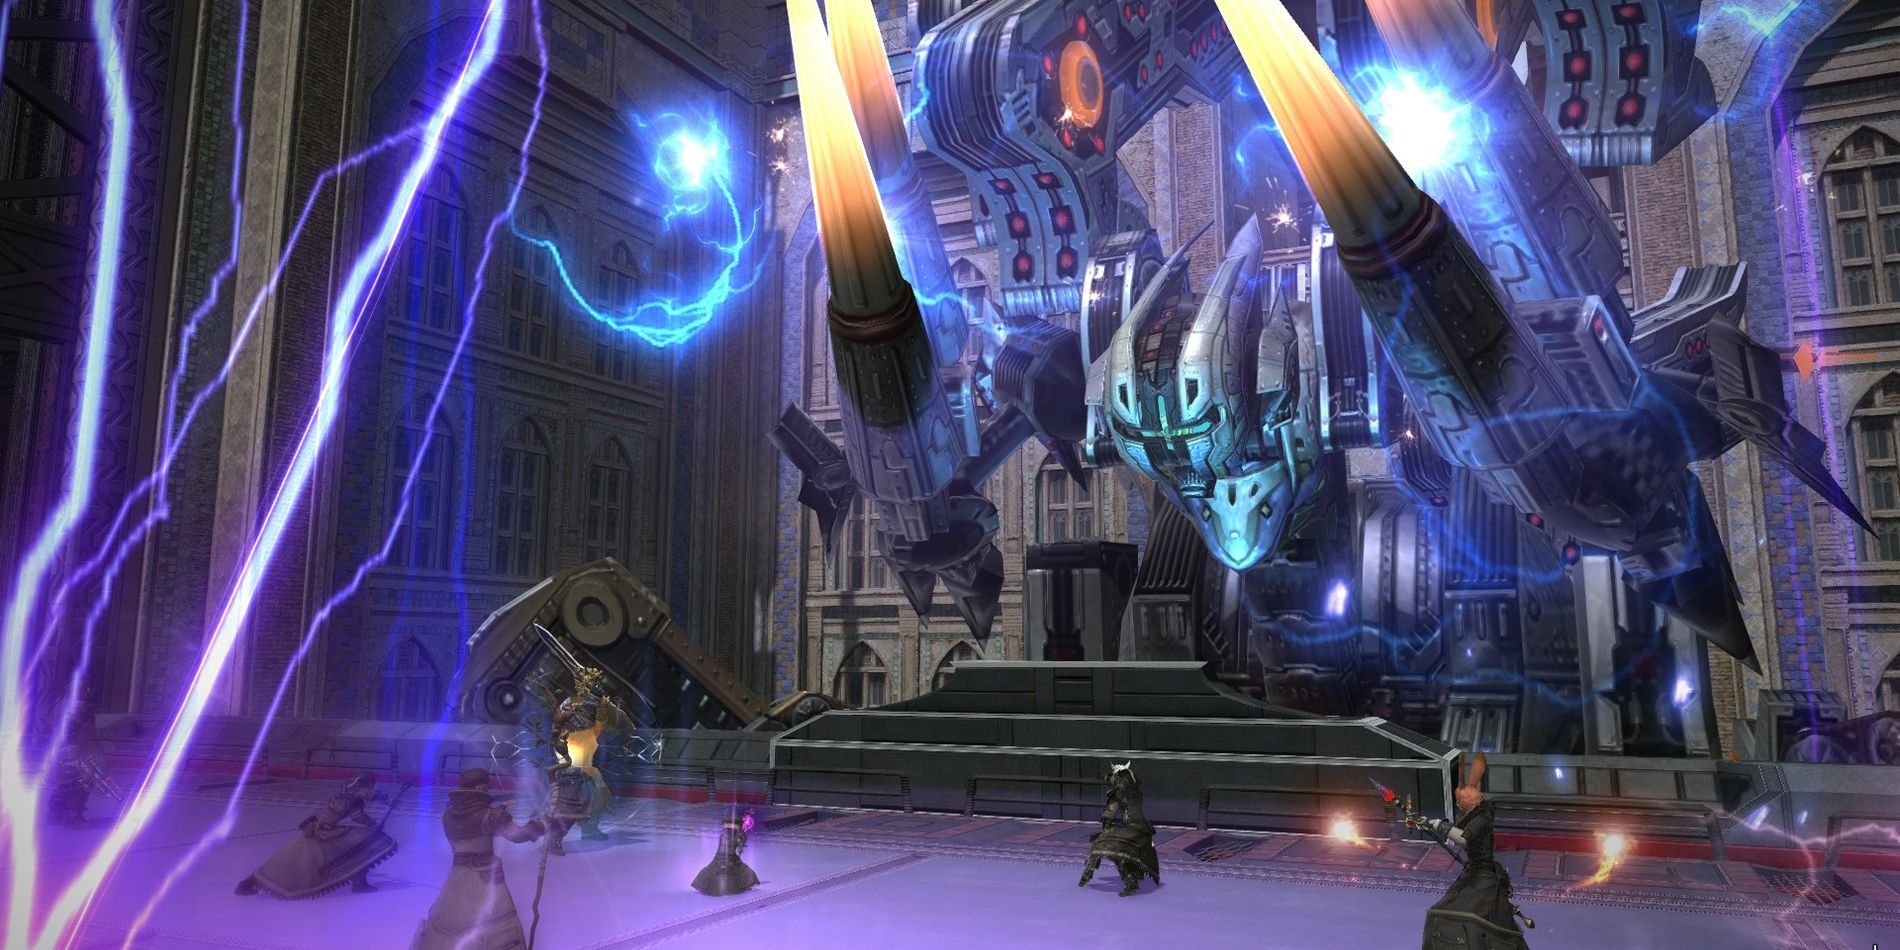 Using Recollection Weapons in Final Fantasy XIV